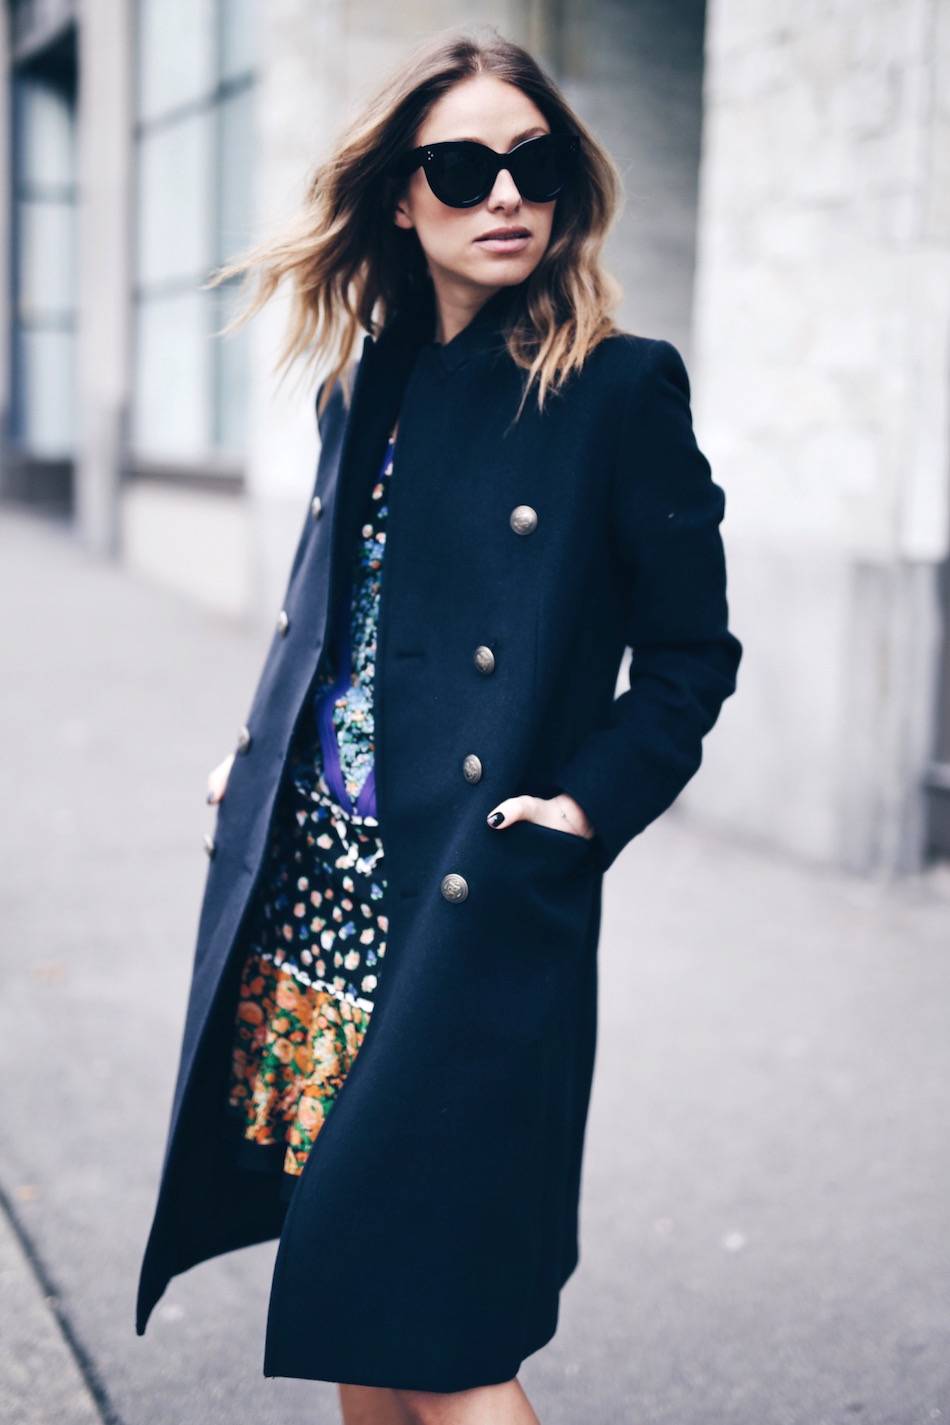 spring floral dress with navy coat